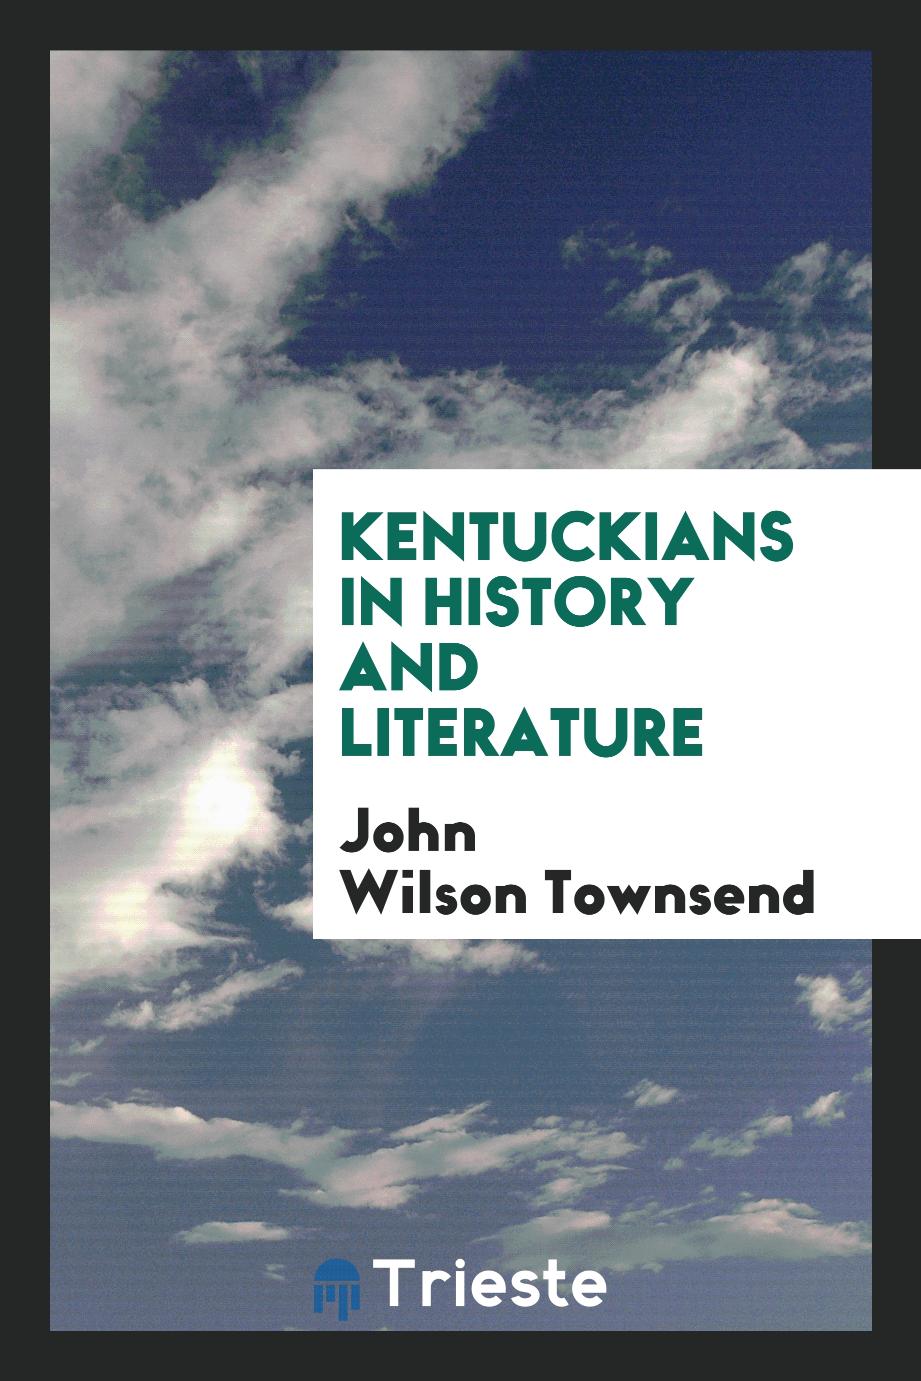 Kentuckians in history and literature